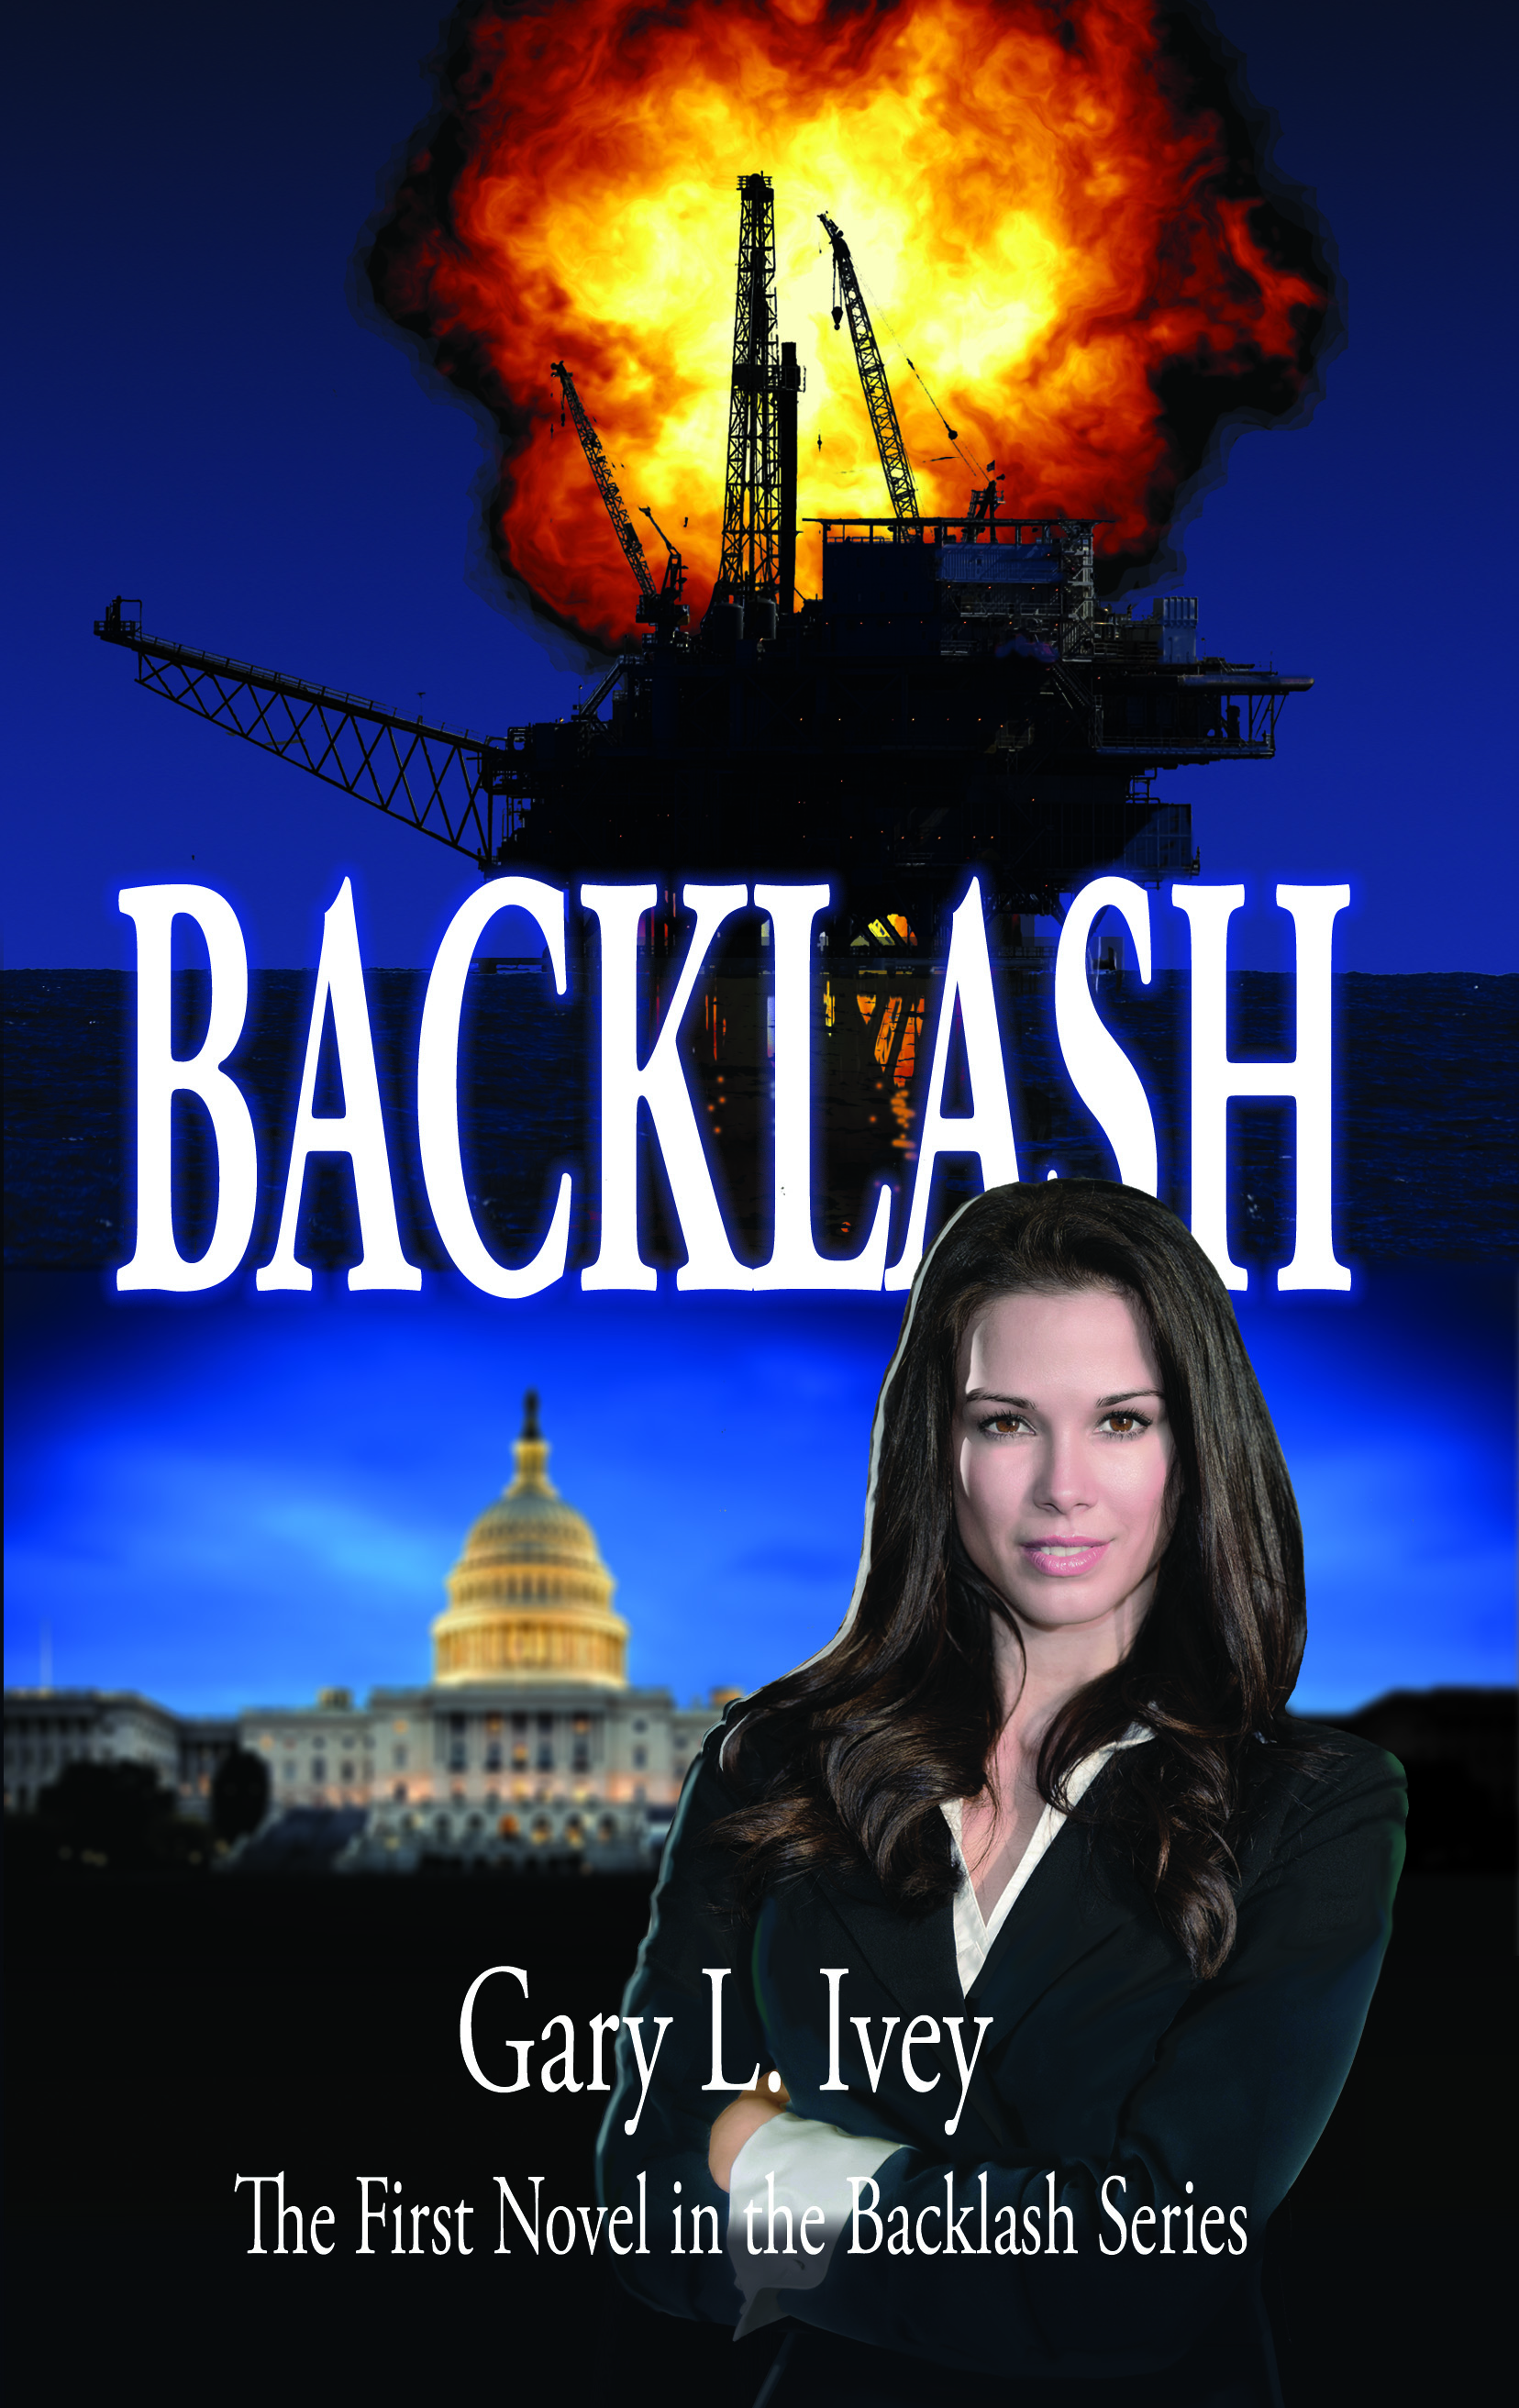 Backlash a Novel by Gary L. Ivey - Opens in New Window